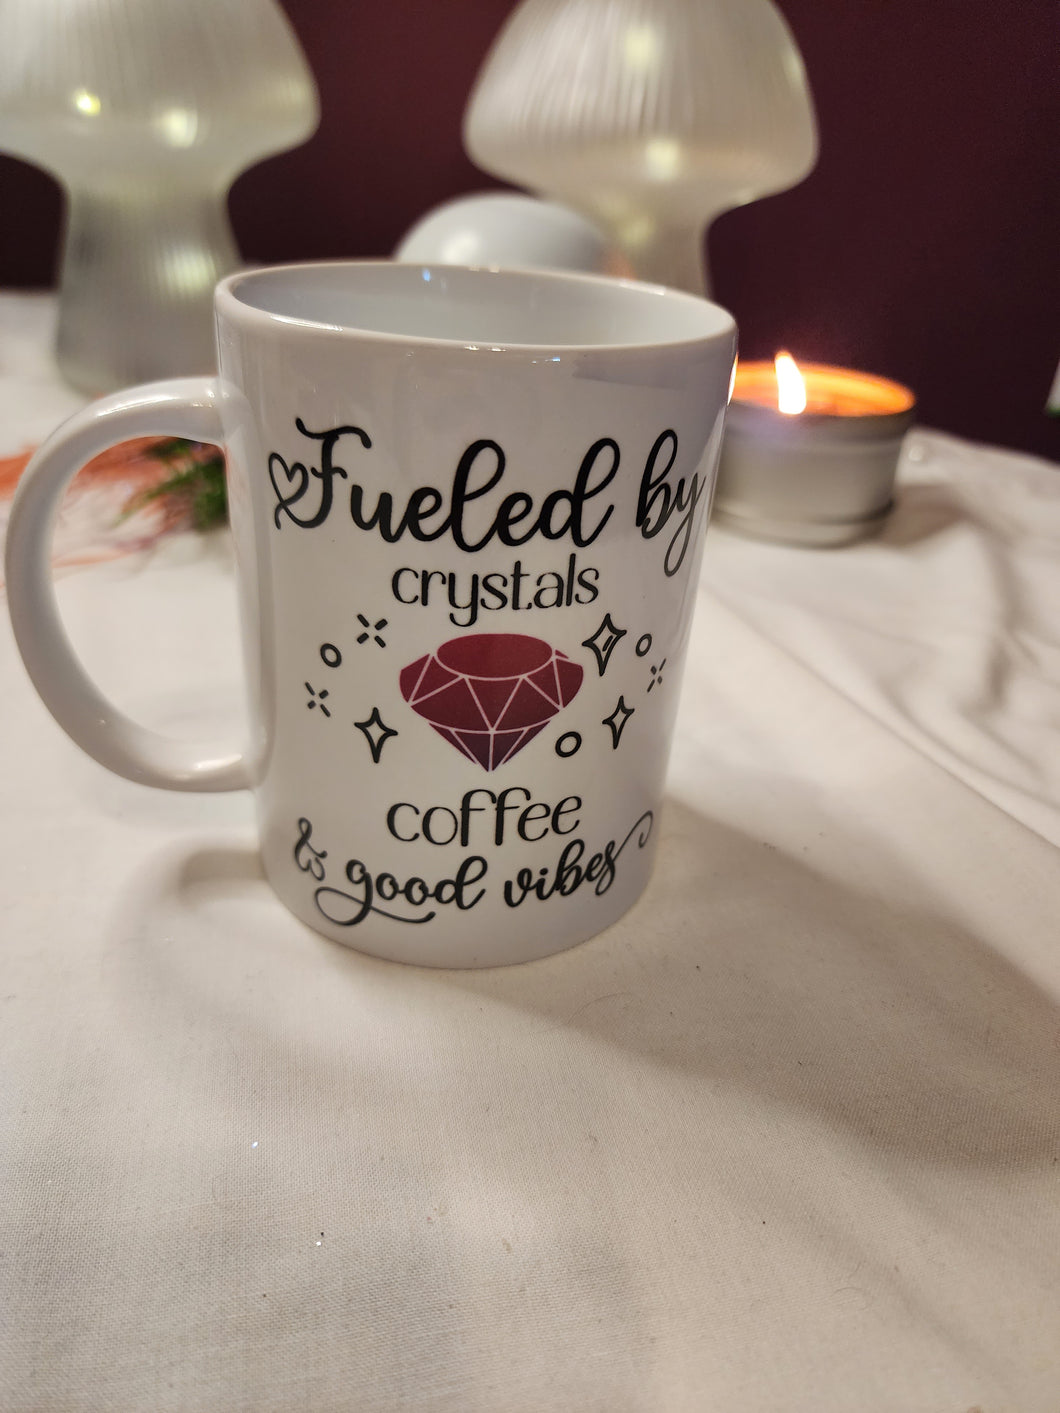 Fueled By Crystals, Coffee, and Good Vibes Mug